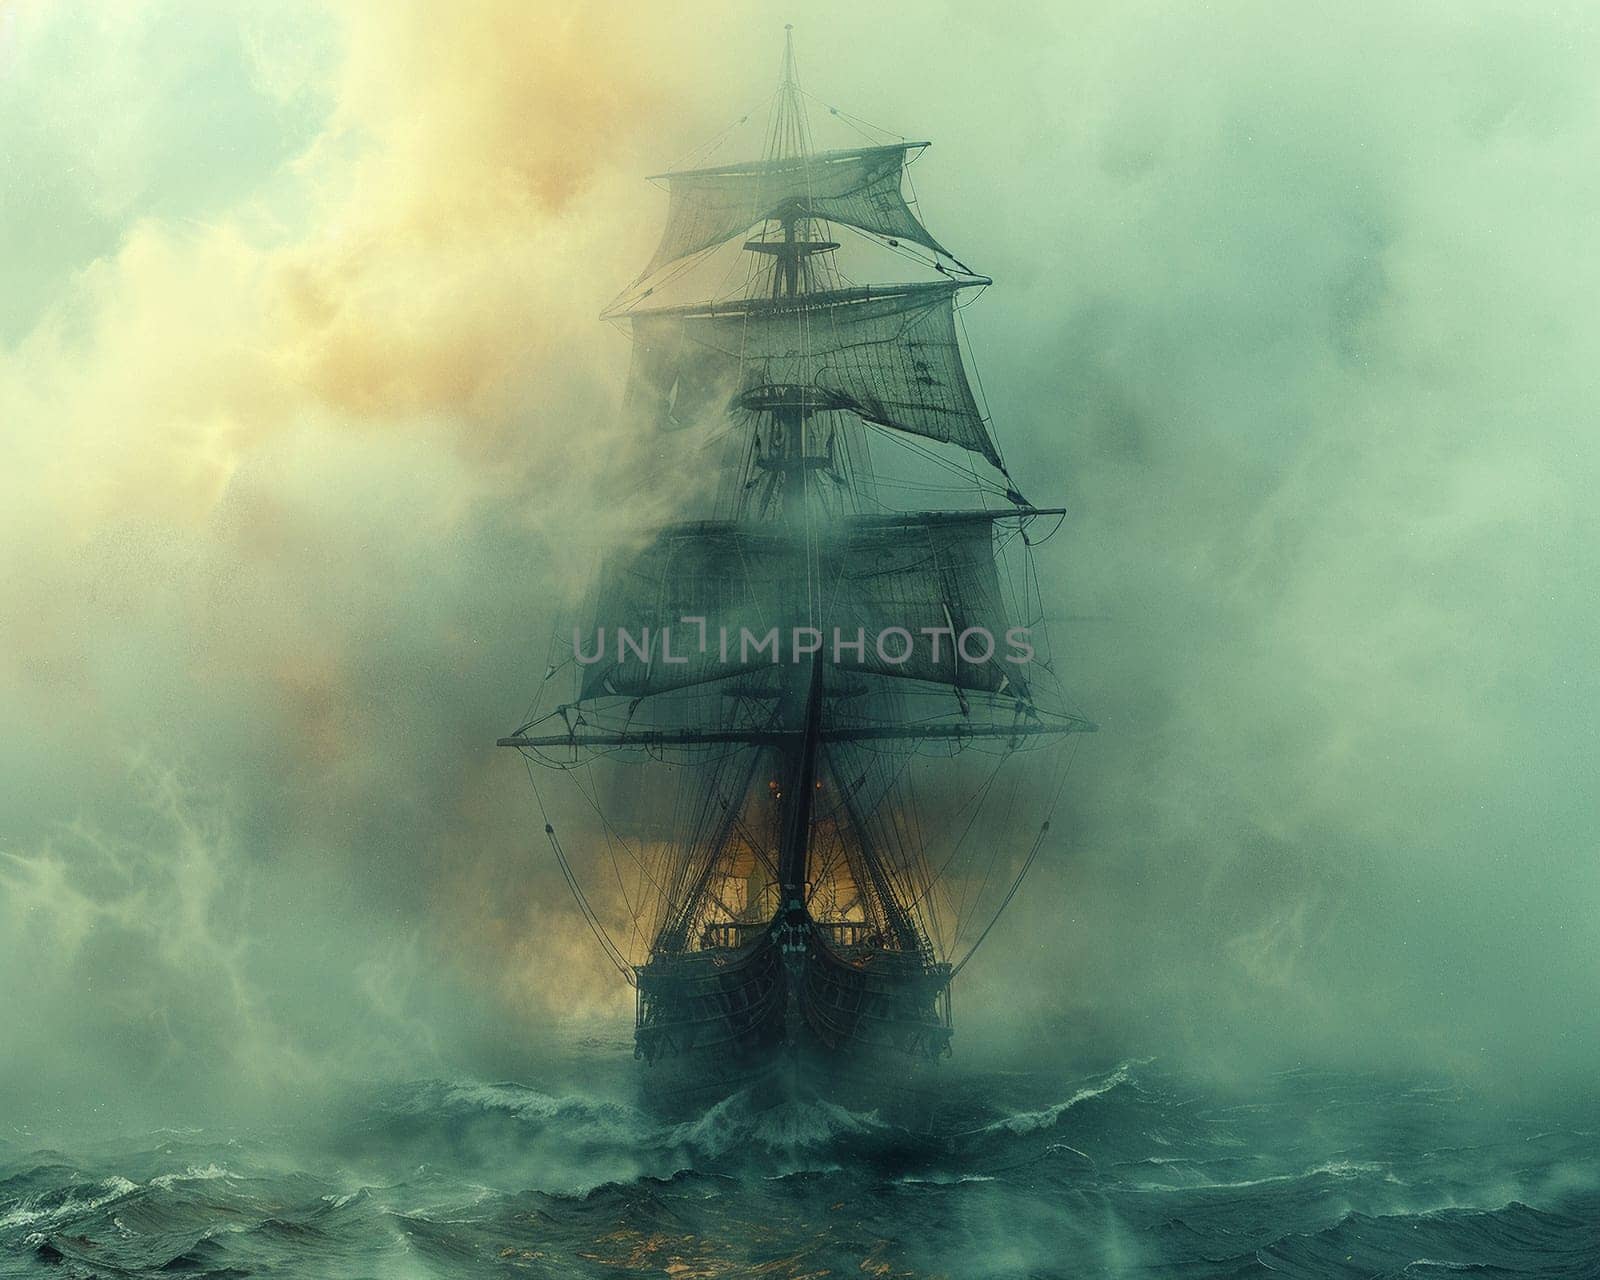 Pirate ship navigating through mystical fog, illustrated with a vintage map aesthetic and aged textures.